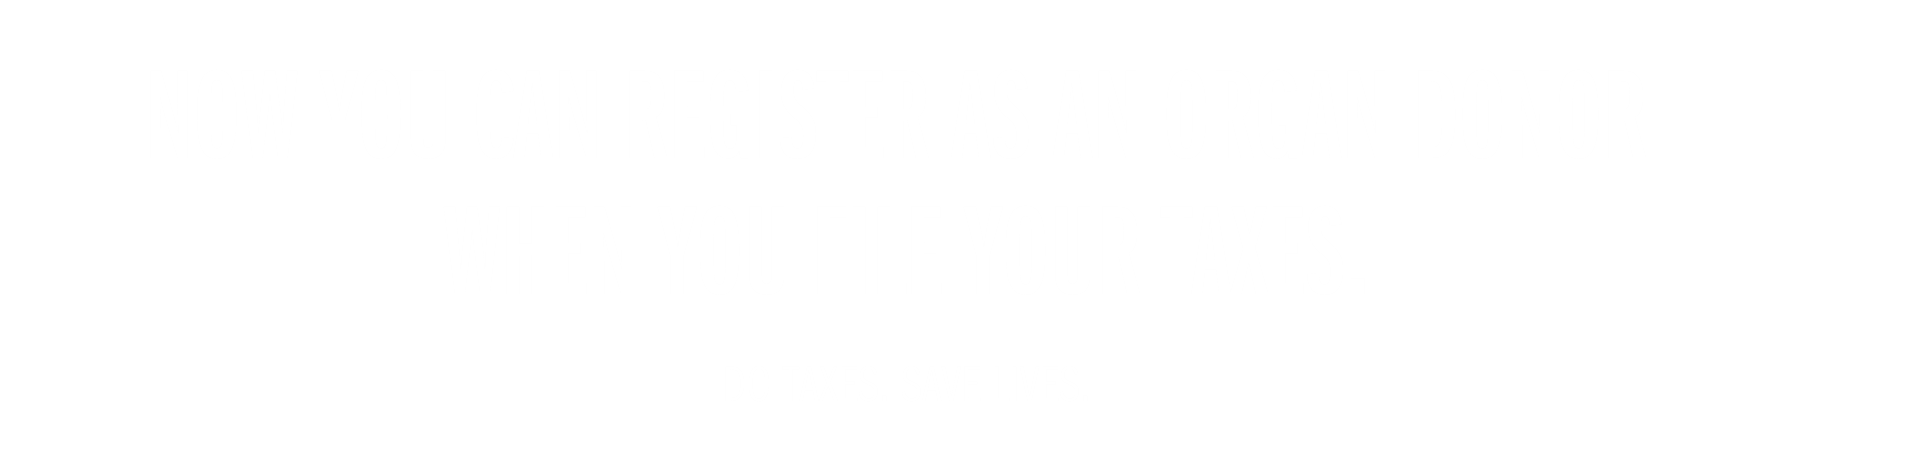 Now you can register as an organ donor when you file your taxes.